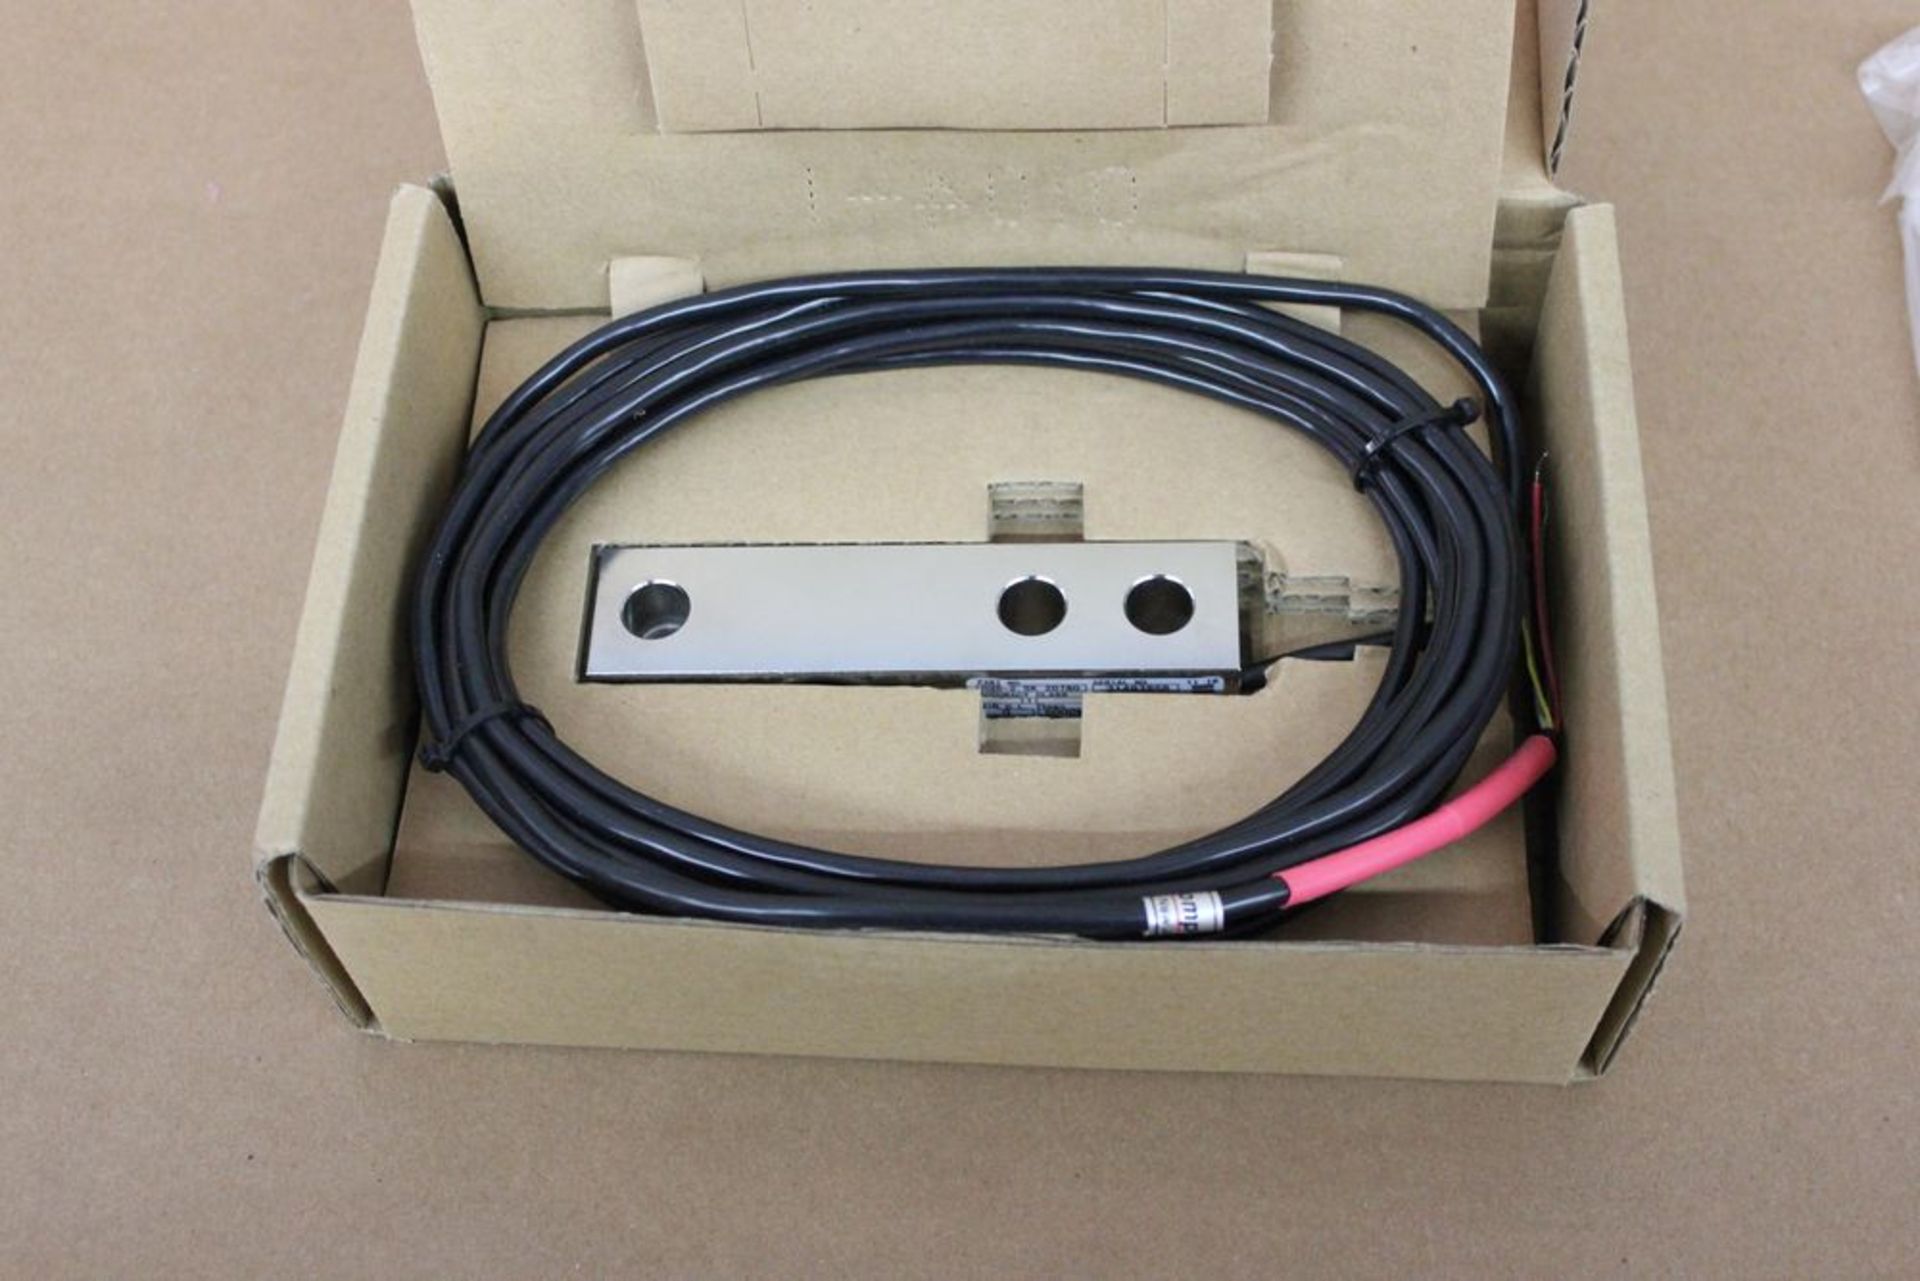 HEW HBM LOAD CELL - Image 4 of 5